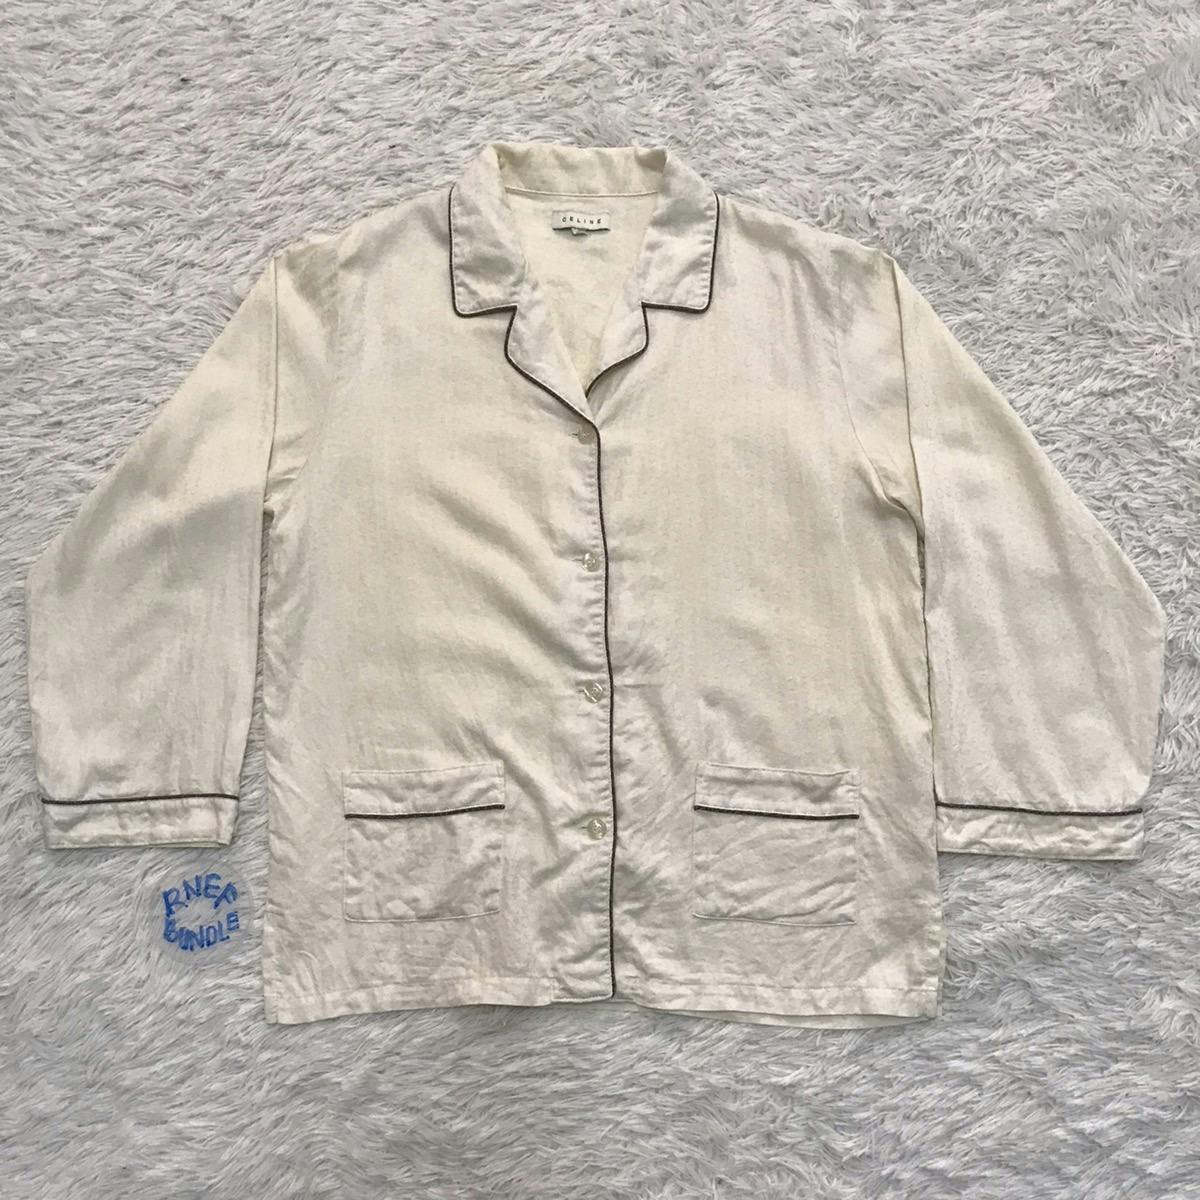 Celine button up shirt made in Japan - 1